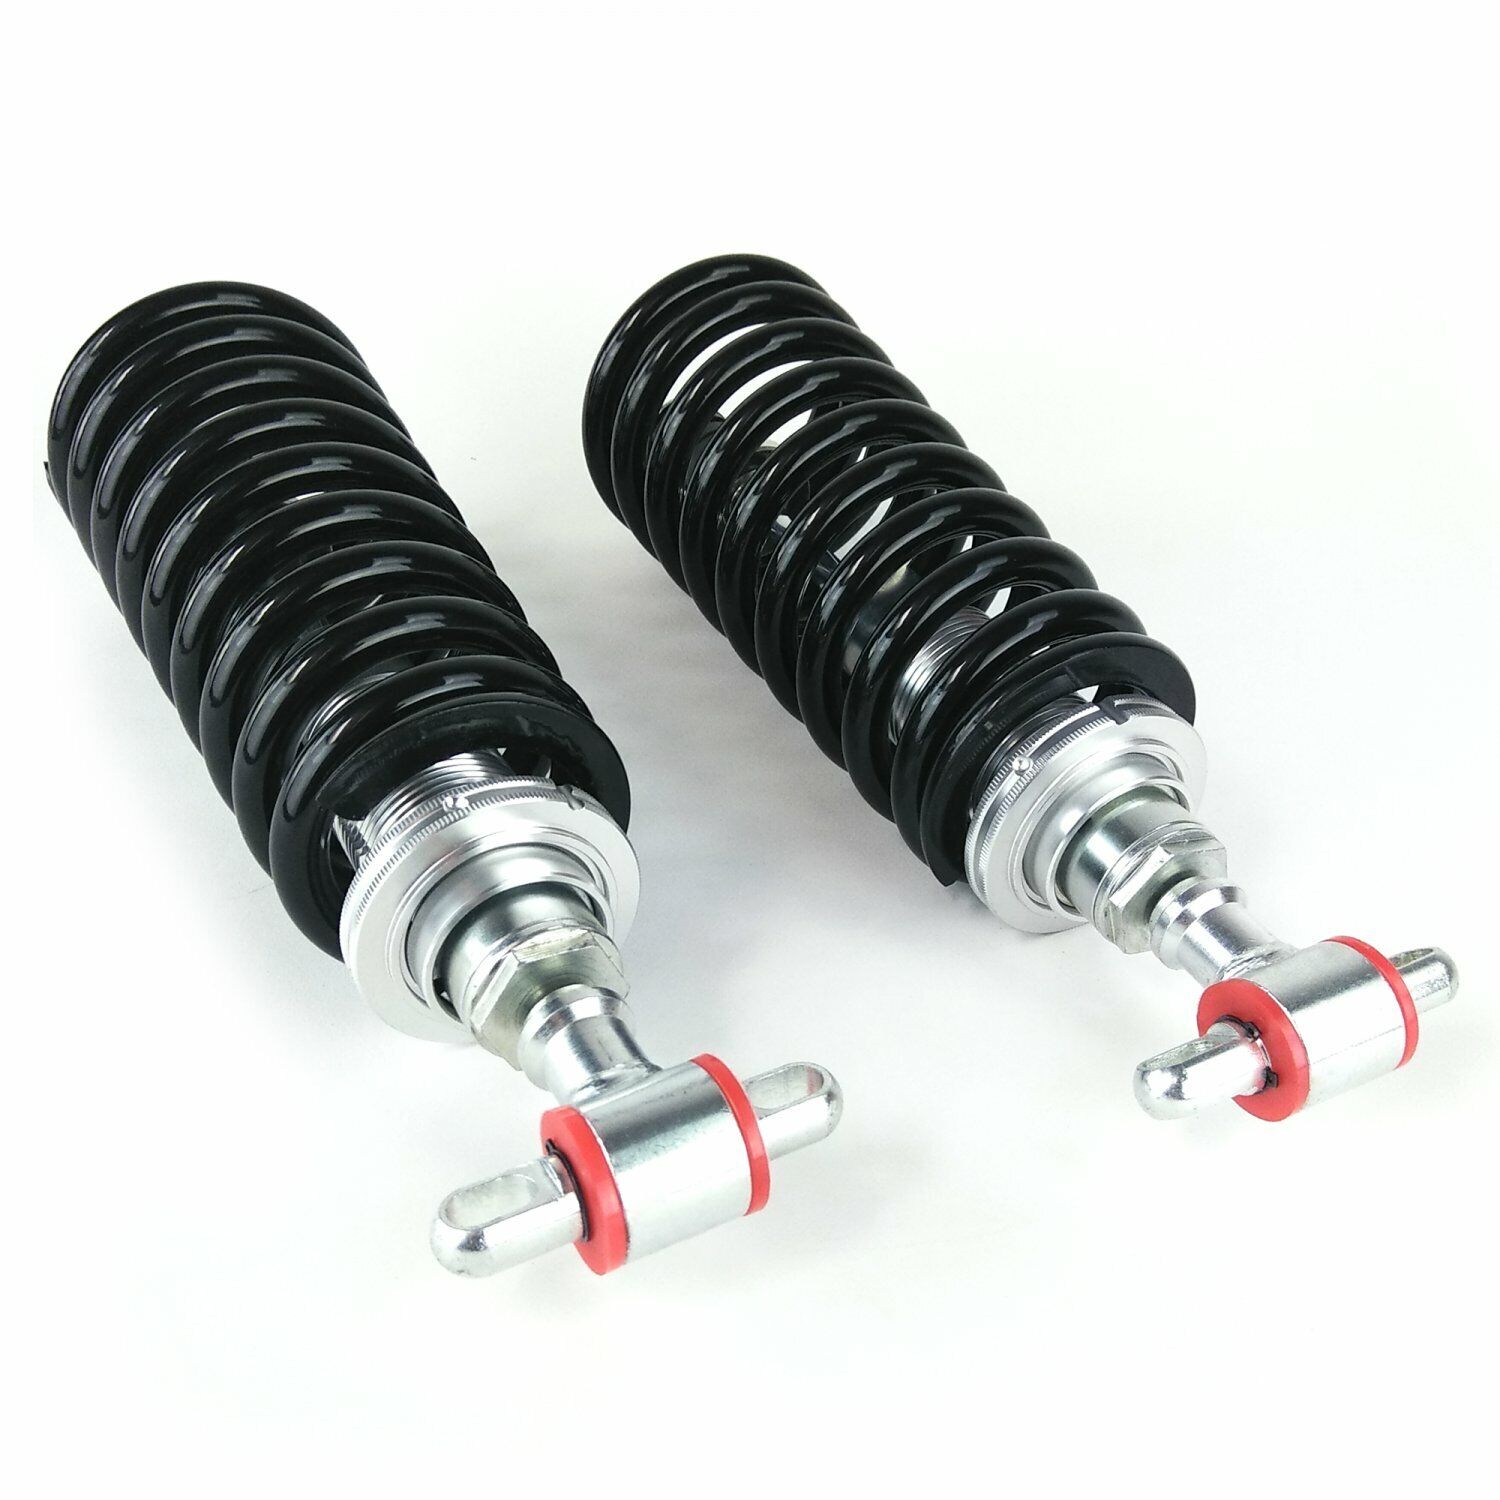 1955-57 Chevy Bel Air 500lbs SBC/ LSX Front Coilover Shocks Fits OE Control Arms